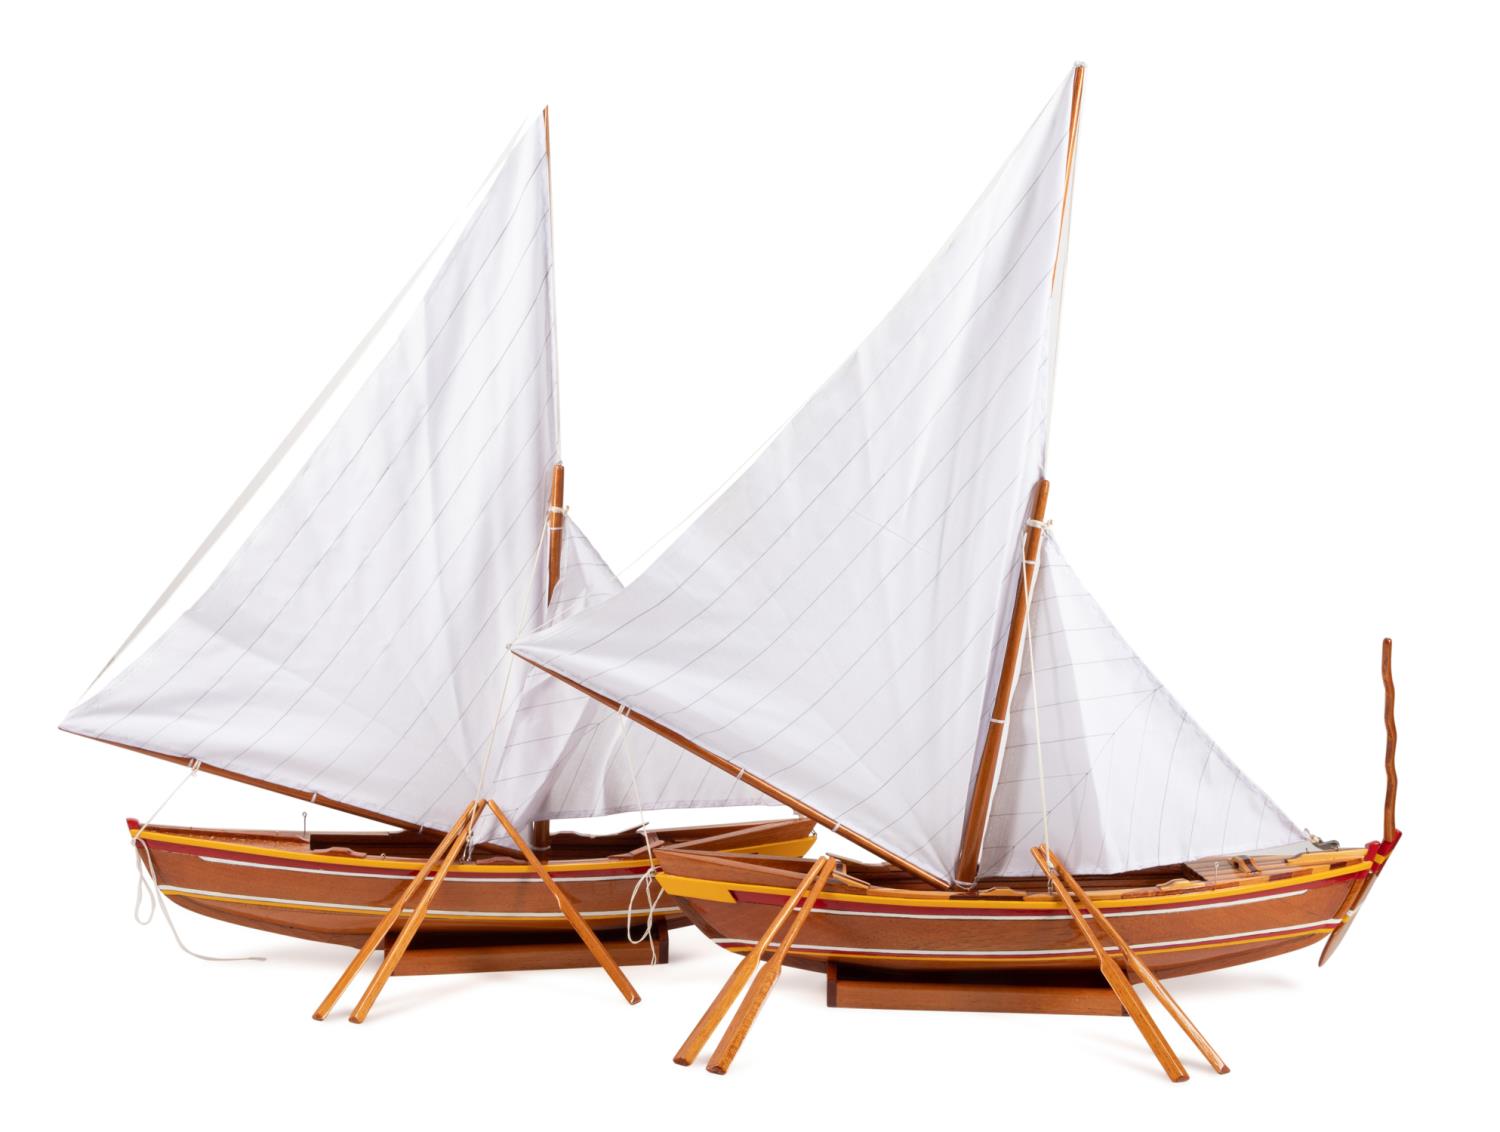 TWO WOODEN POND BOAT MODELS WITH